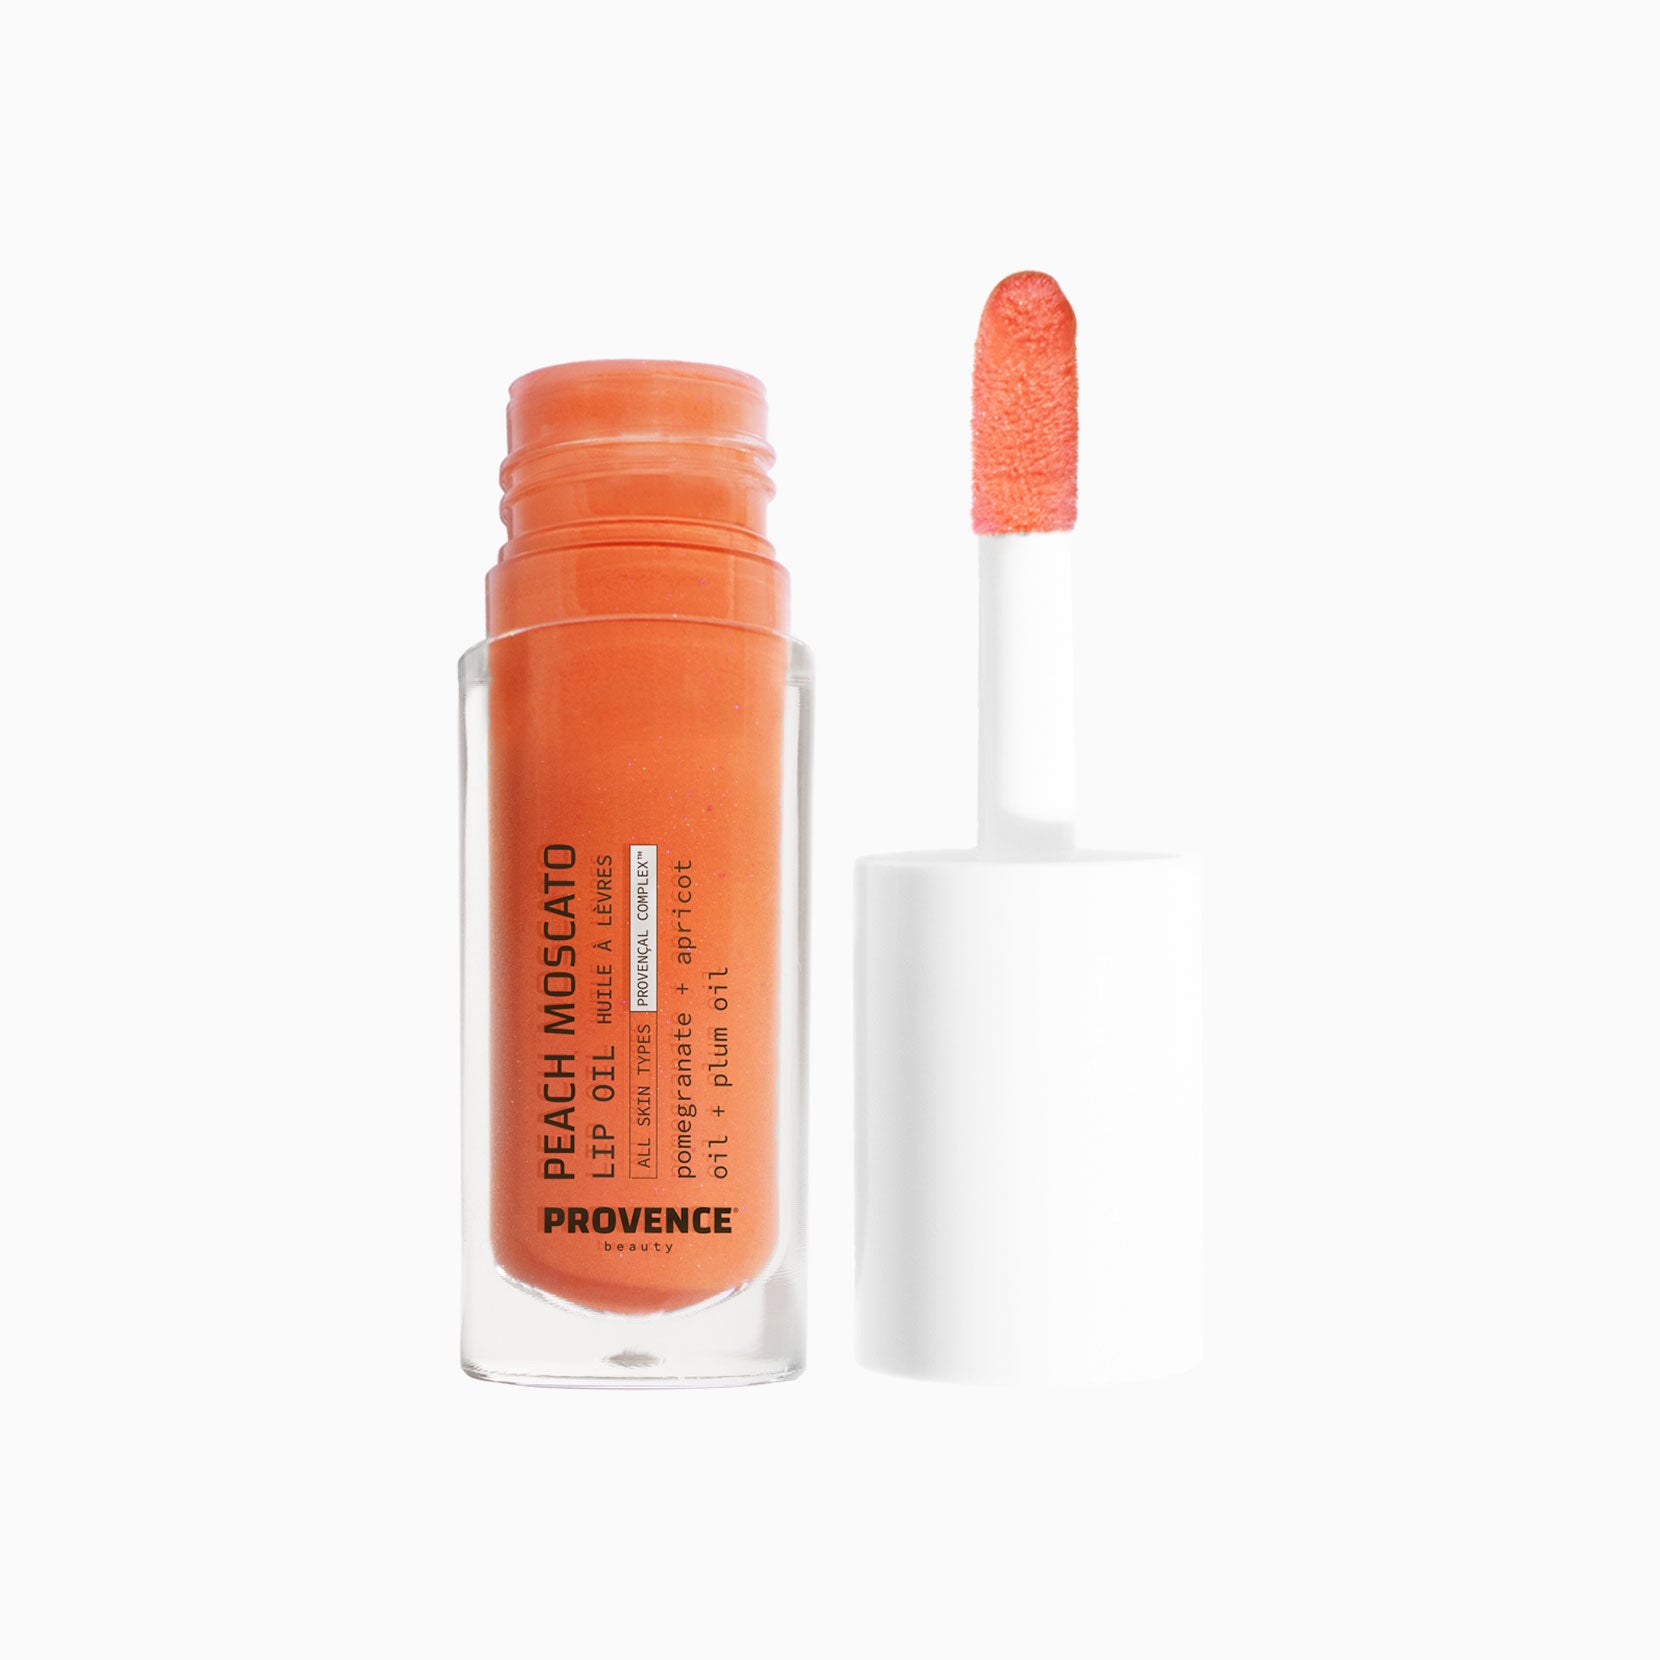 Peach Moscato Hydrating Tinted Lip Oil